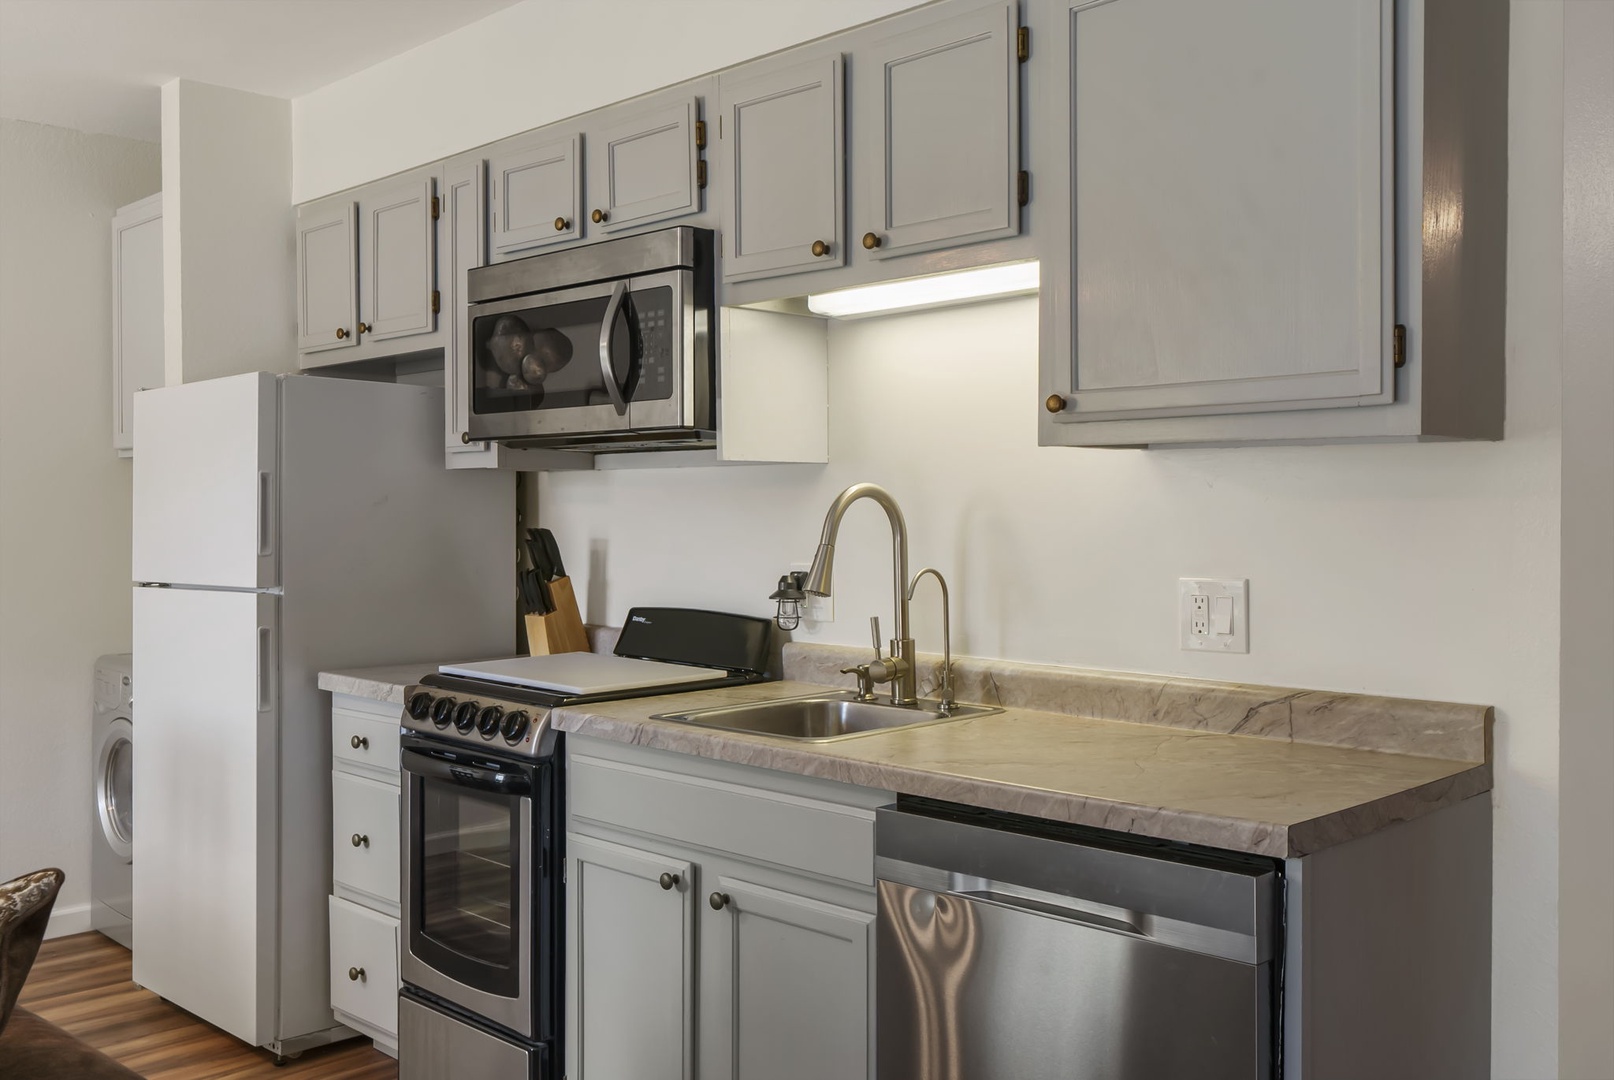 The open Kitchen offers plenty of amenities and storage space